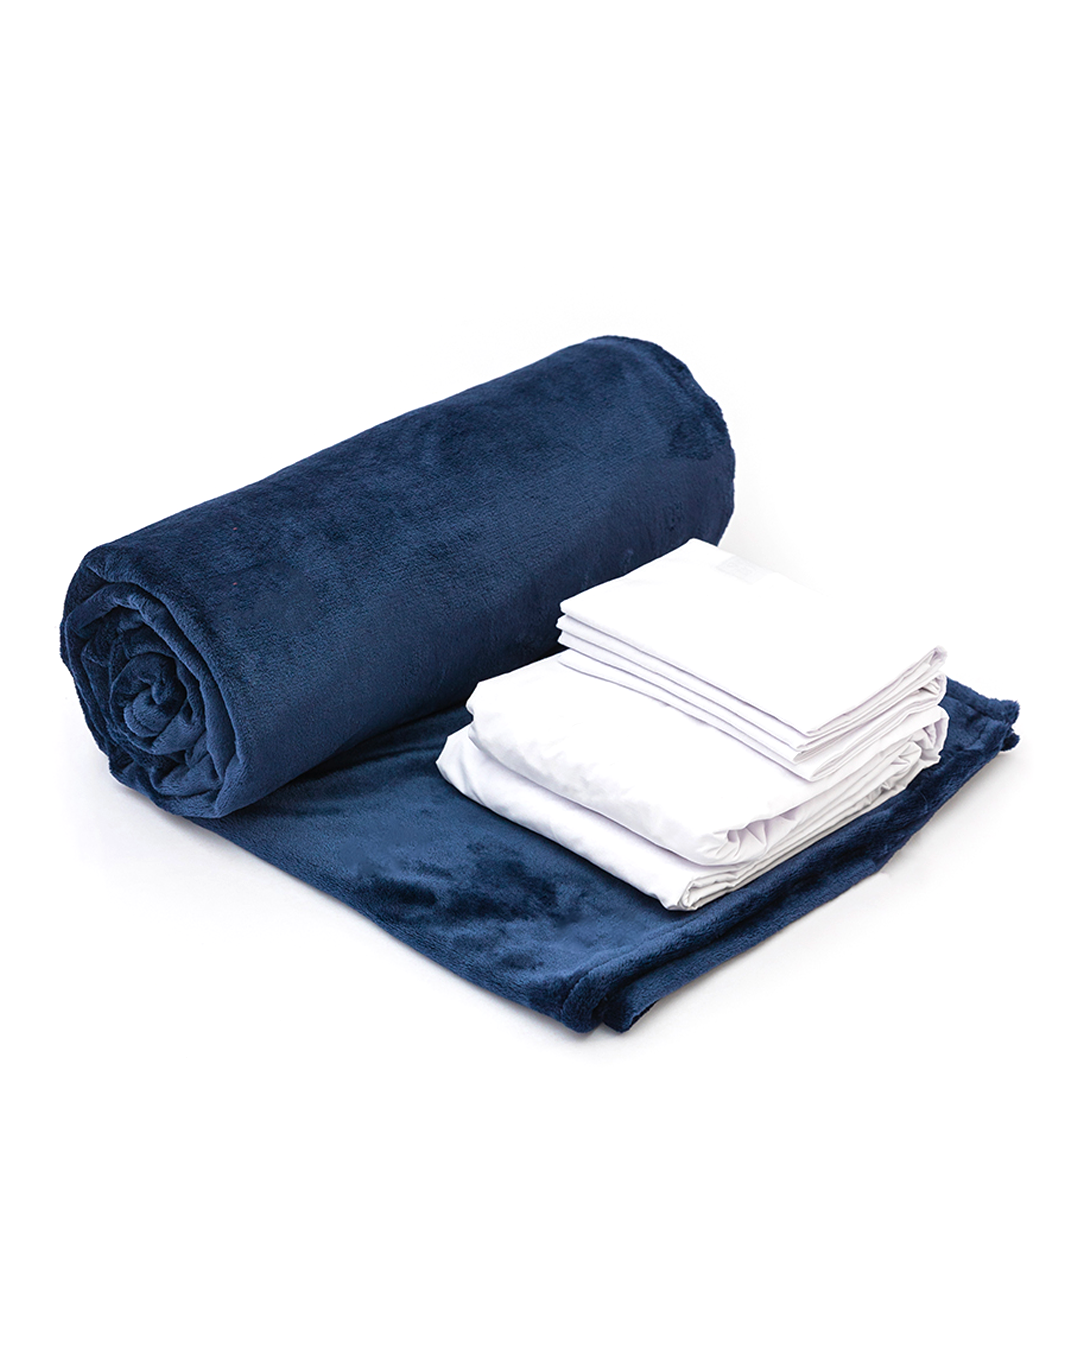 Fleece Blanket + Percale Fitted Sheet